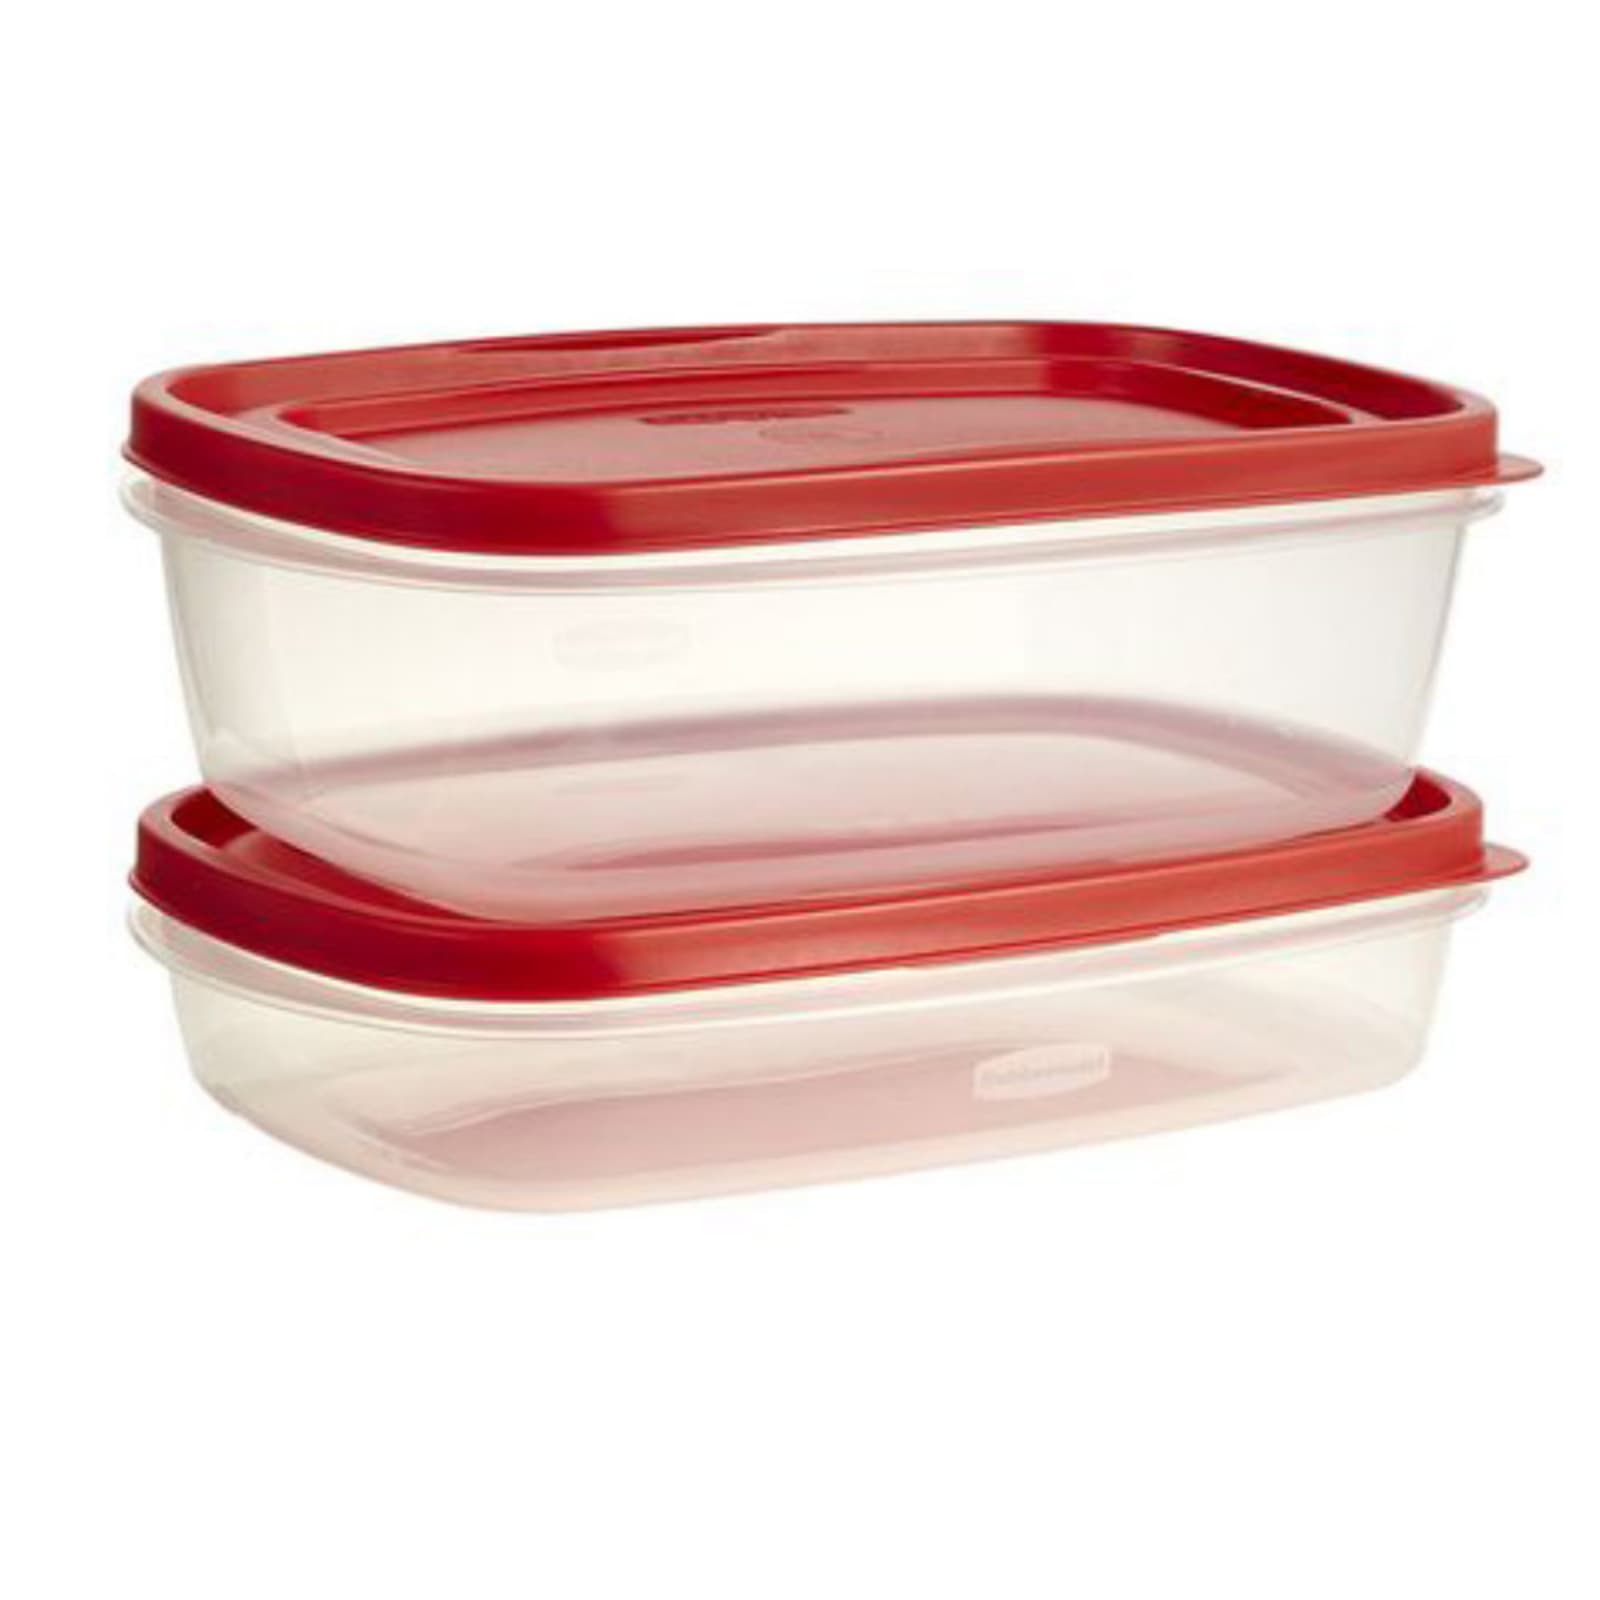 Rubbermaid Easy Find Lids Glass Food Storage Container, 8 cups 